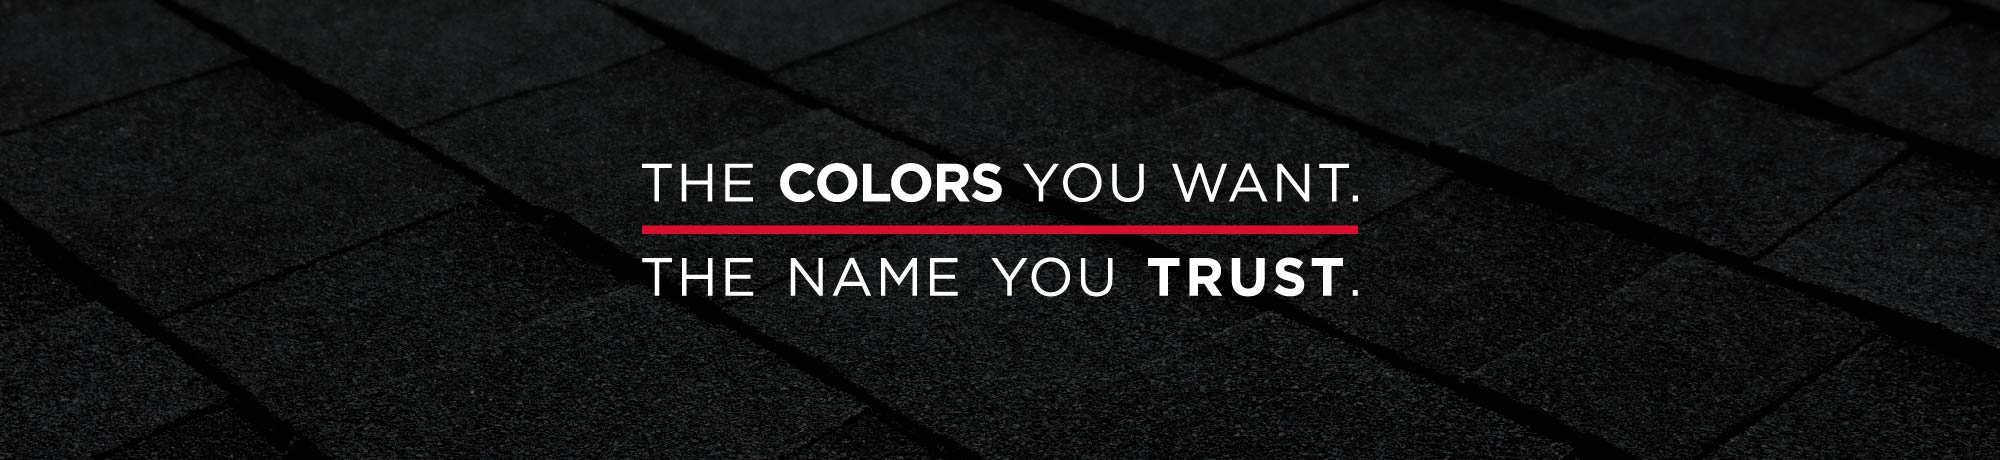 The Colors You Want. The Name You Trust.